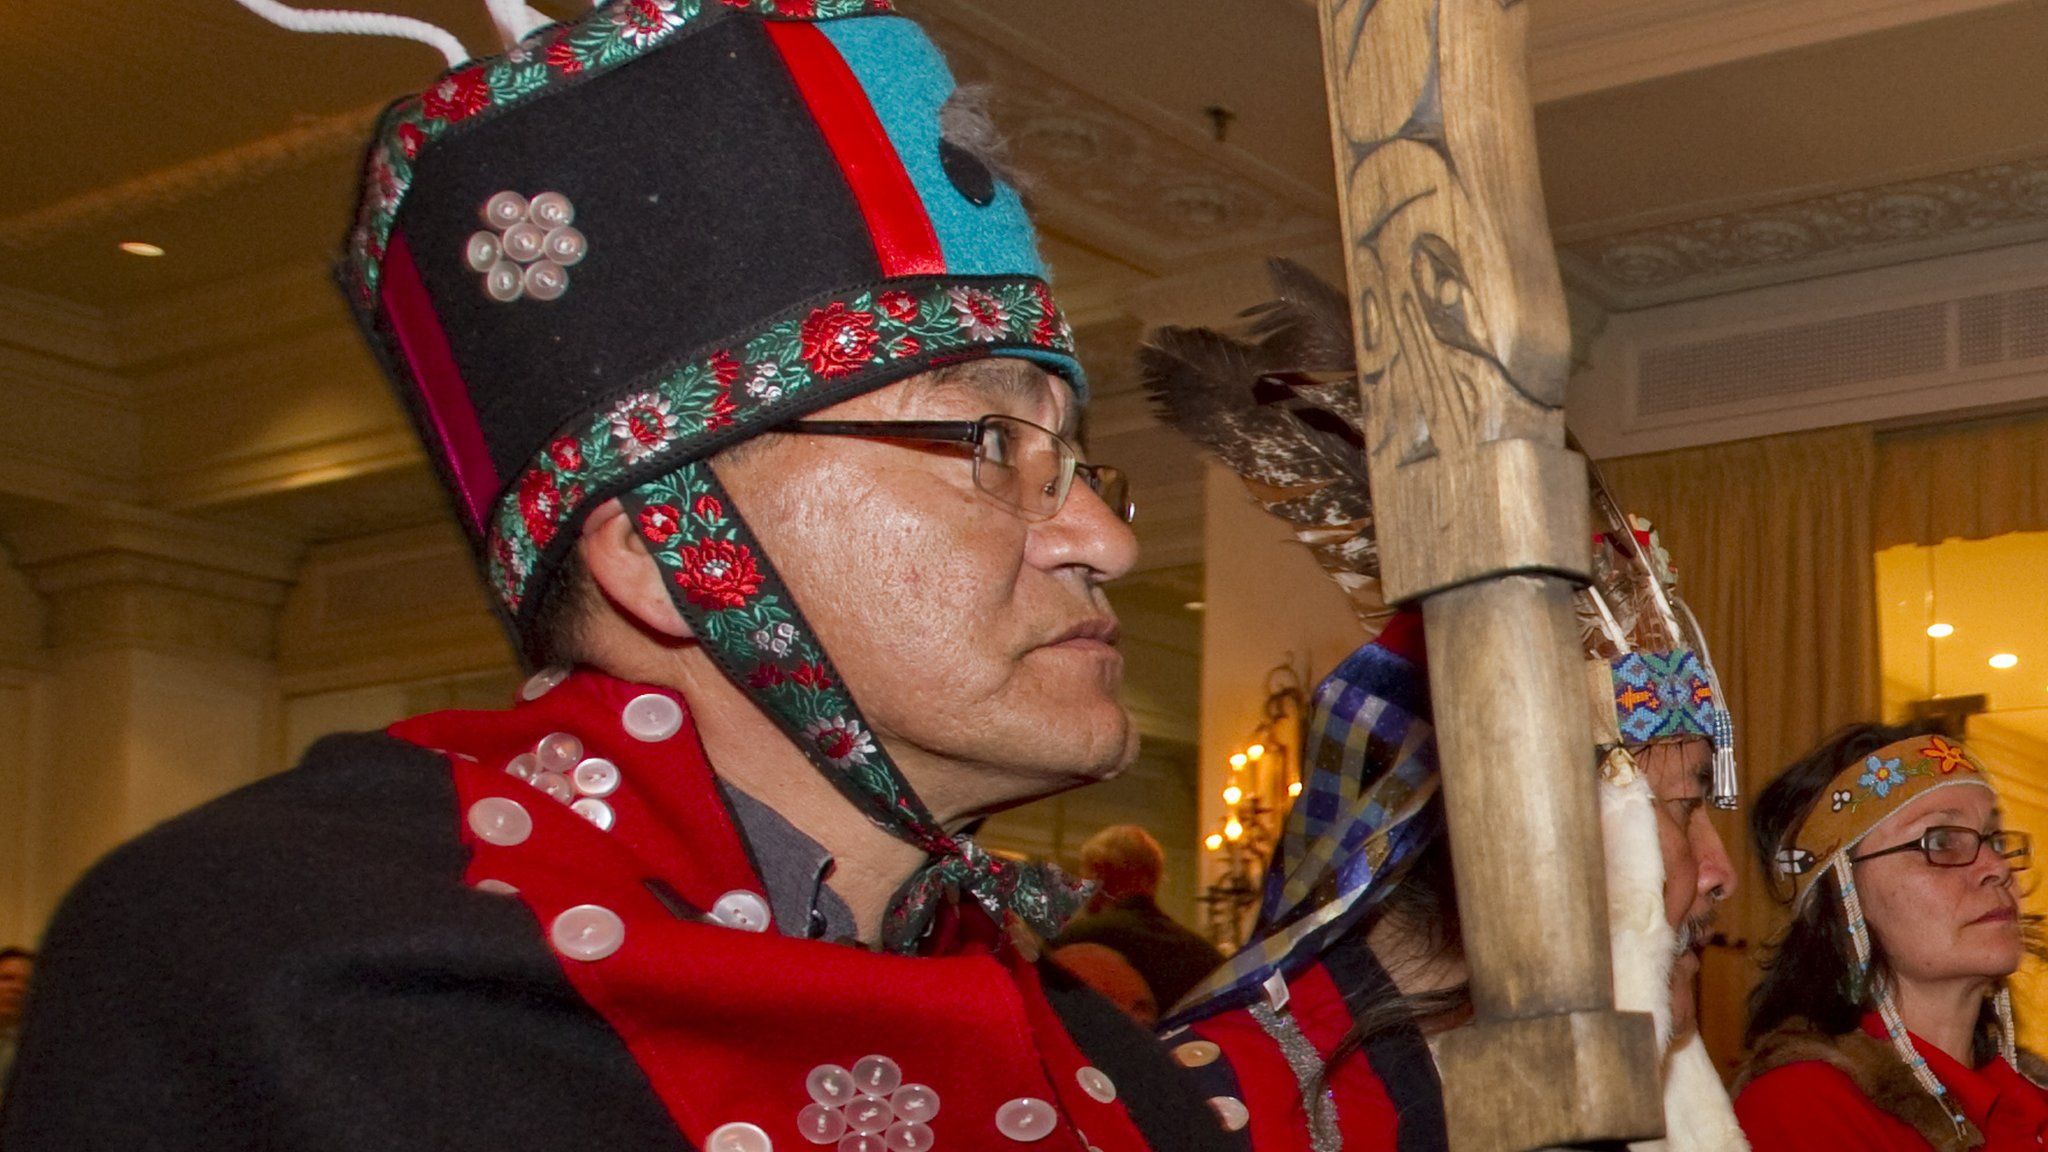 Indigenous leaders are against a pipeline project in British Columbia, Canada